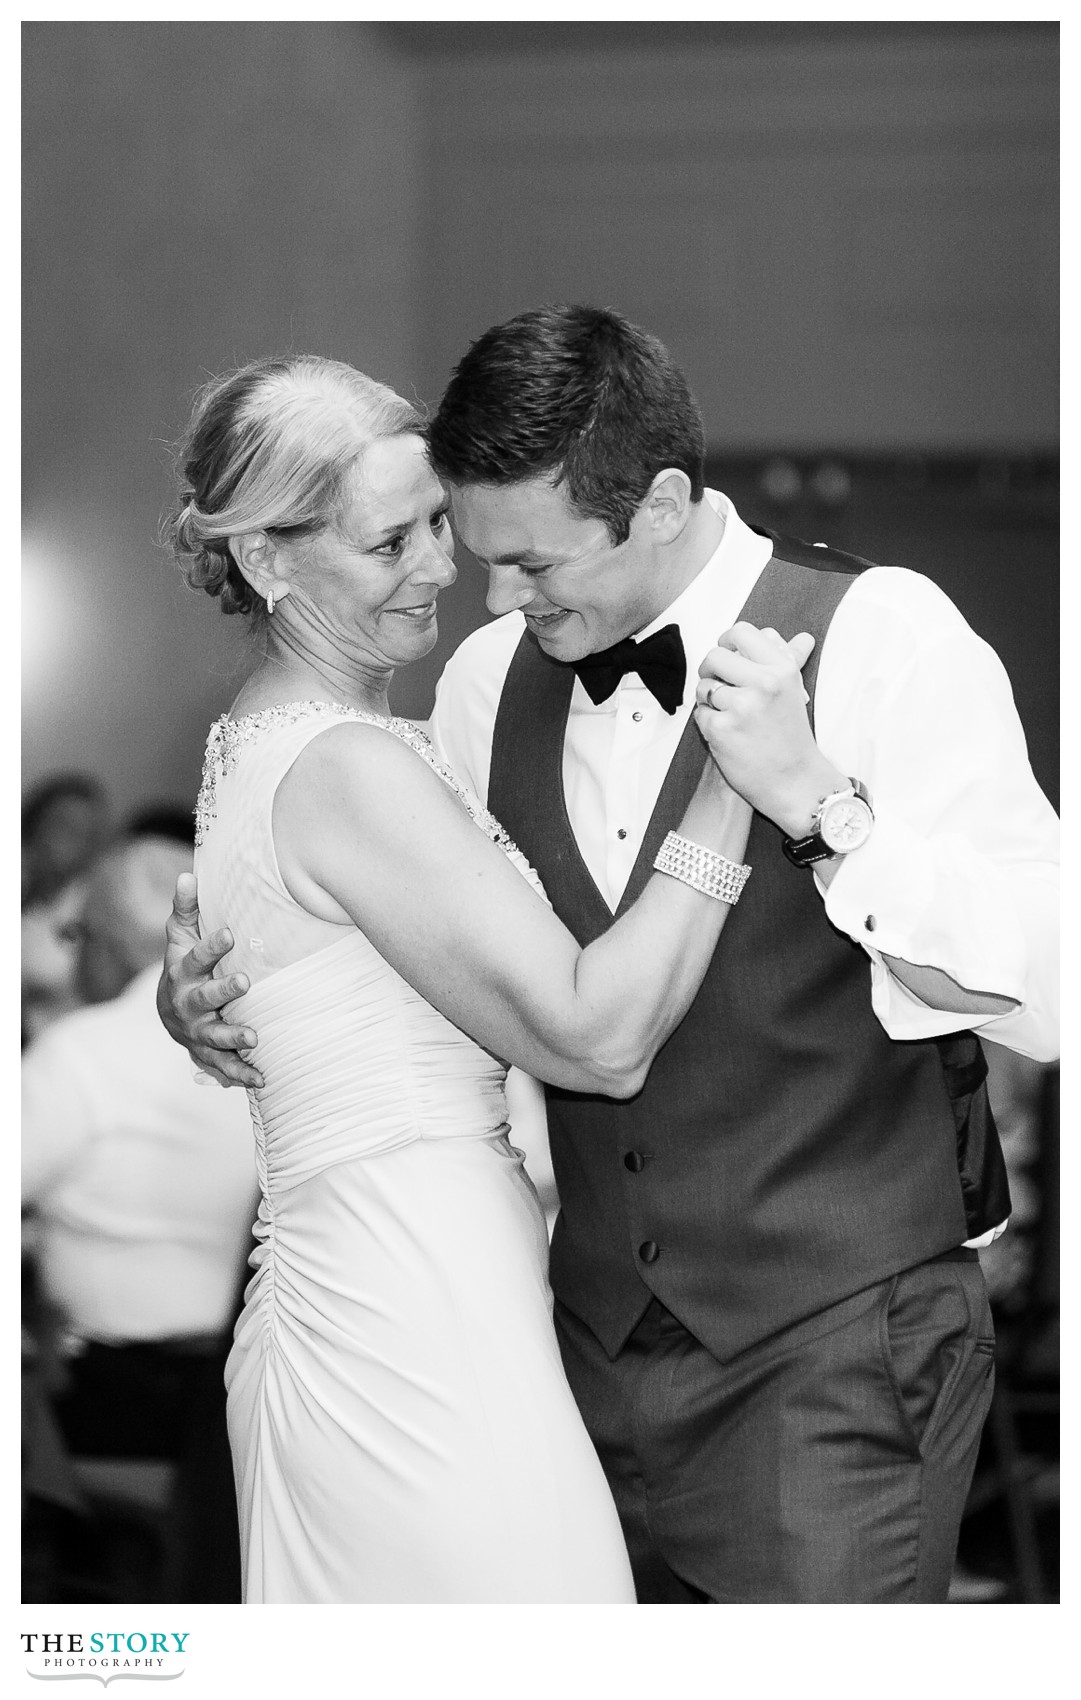 mother and son dance at 1000 Islands Harbor Hotel wedding reception